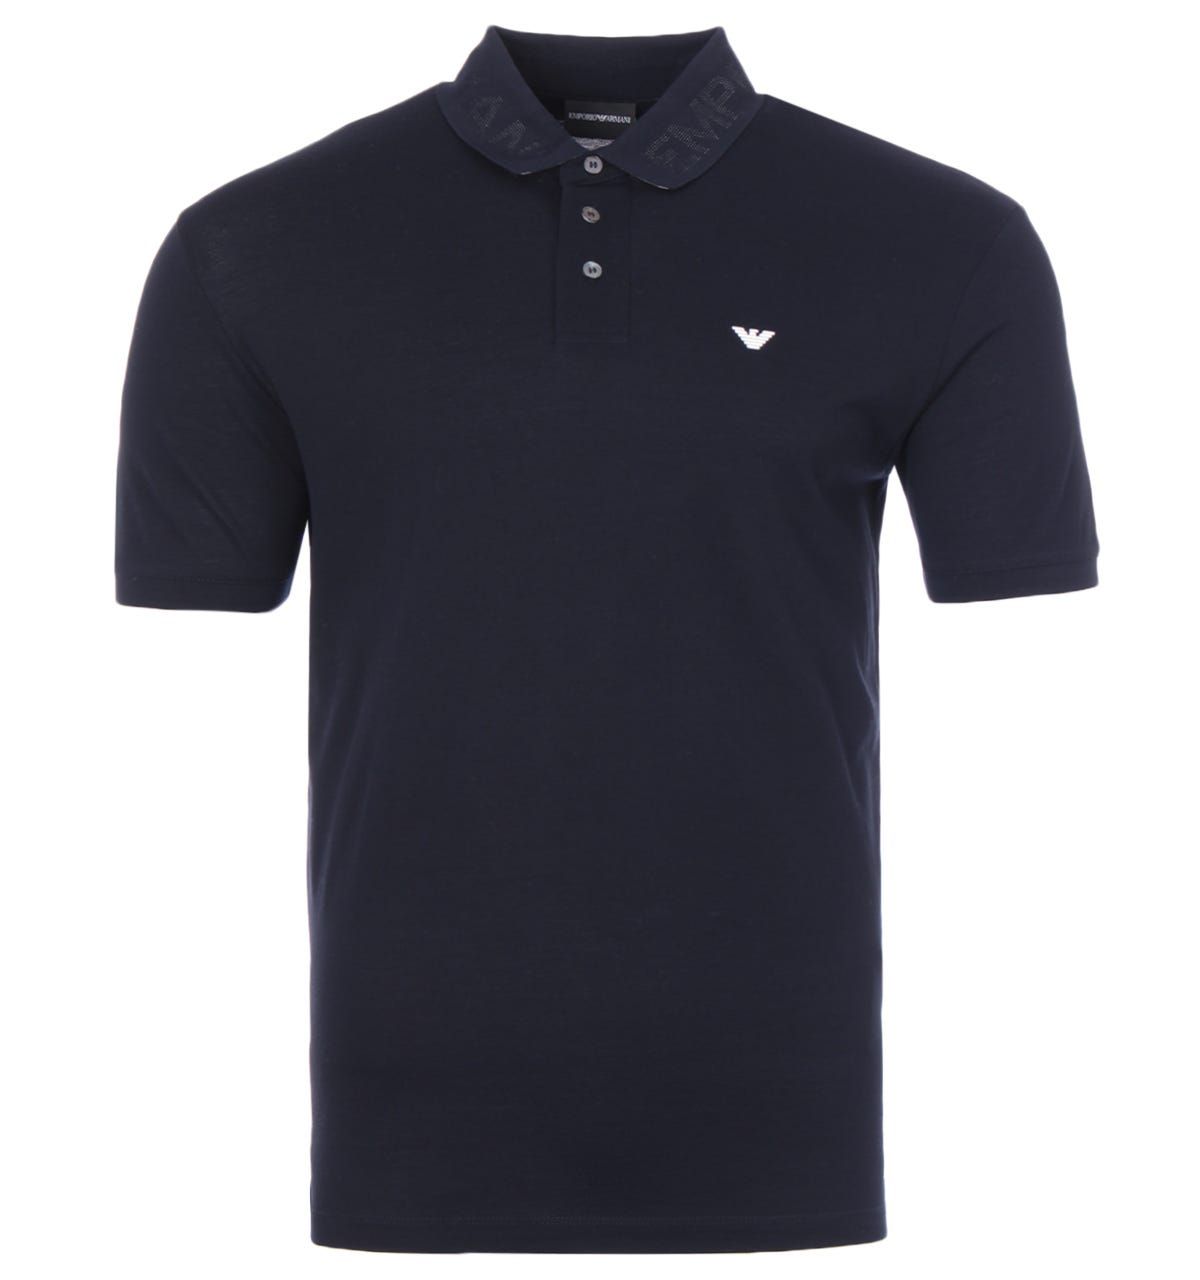 The perfect wardrobe essential for transcending through the seasons from Emporio Armani. Crafted from pure cotton pique for day long comfort and breathability. This practical polo features a classic rib-knit collar with Emporio Armani lettering jacquard around the collar, a three button placket, short sleeves and a vented hemline. Finished with the iconic Armani Eagle logo at the chest.Regular Fit, Pure Cotton Pique, Rib-Knit Polo Collar, Three Button Placket, Short Sleeves with Ribbed Cuffs, Vented Hemline, Emporio Armani Branding. Fit & Style:Regular Fit, Fits True to Size. Composition & Care:100% Cotton , Machine Wash.